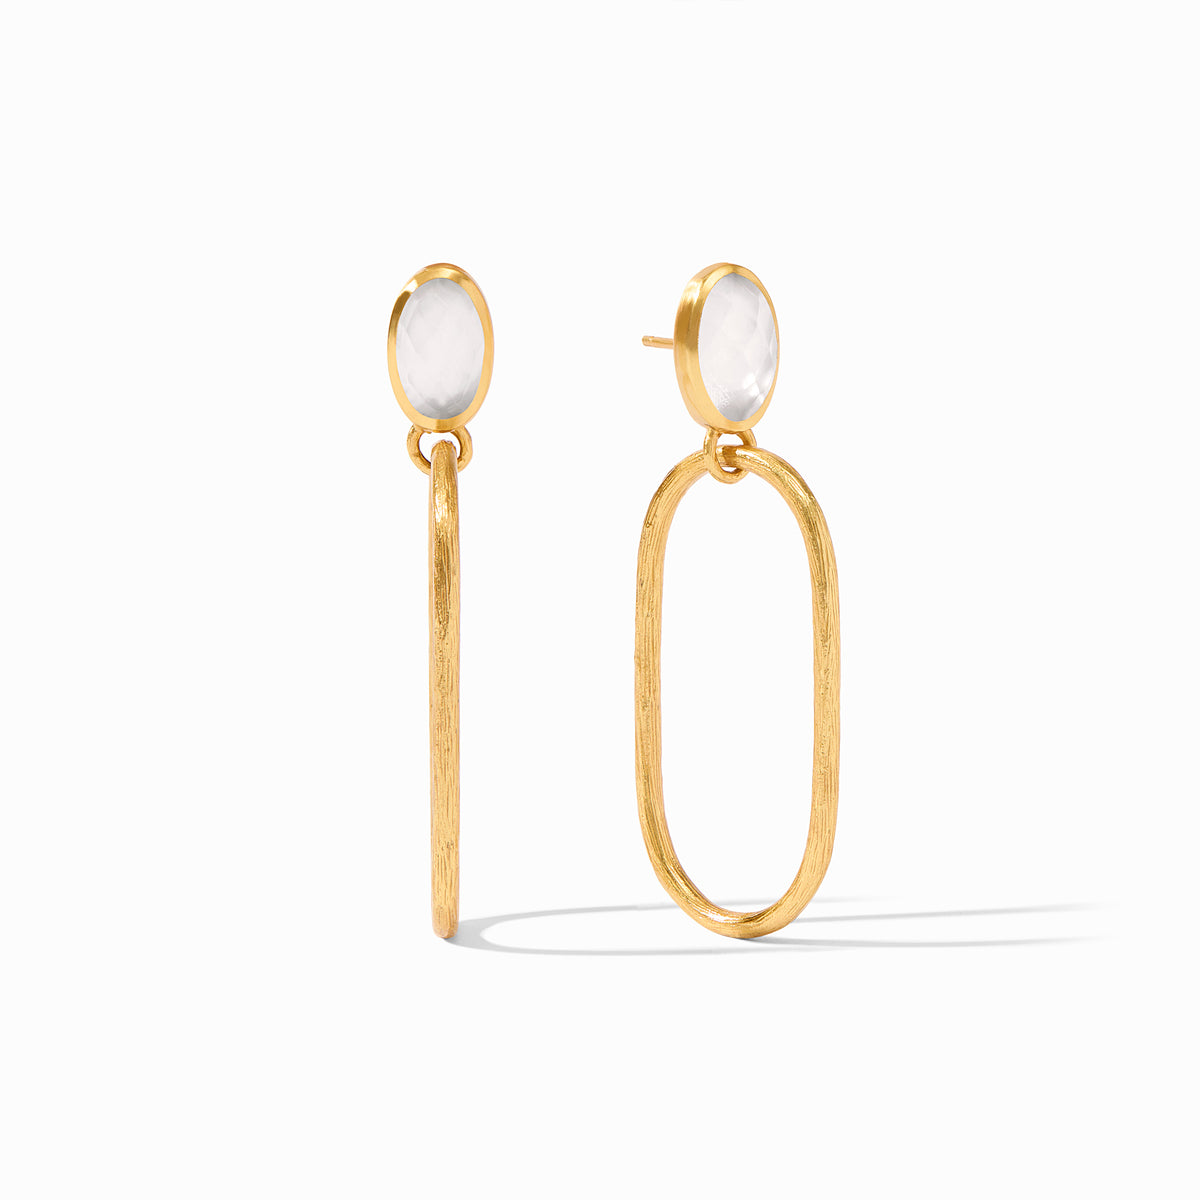 Julie Vos - Ivy Statement Earring, Iridescent Clear Crystal